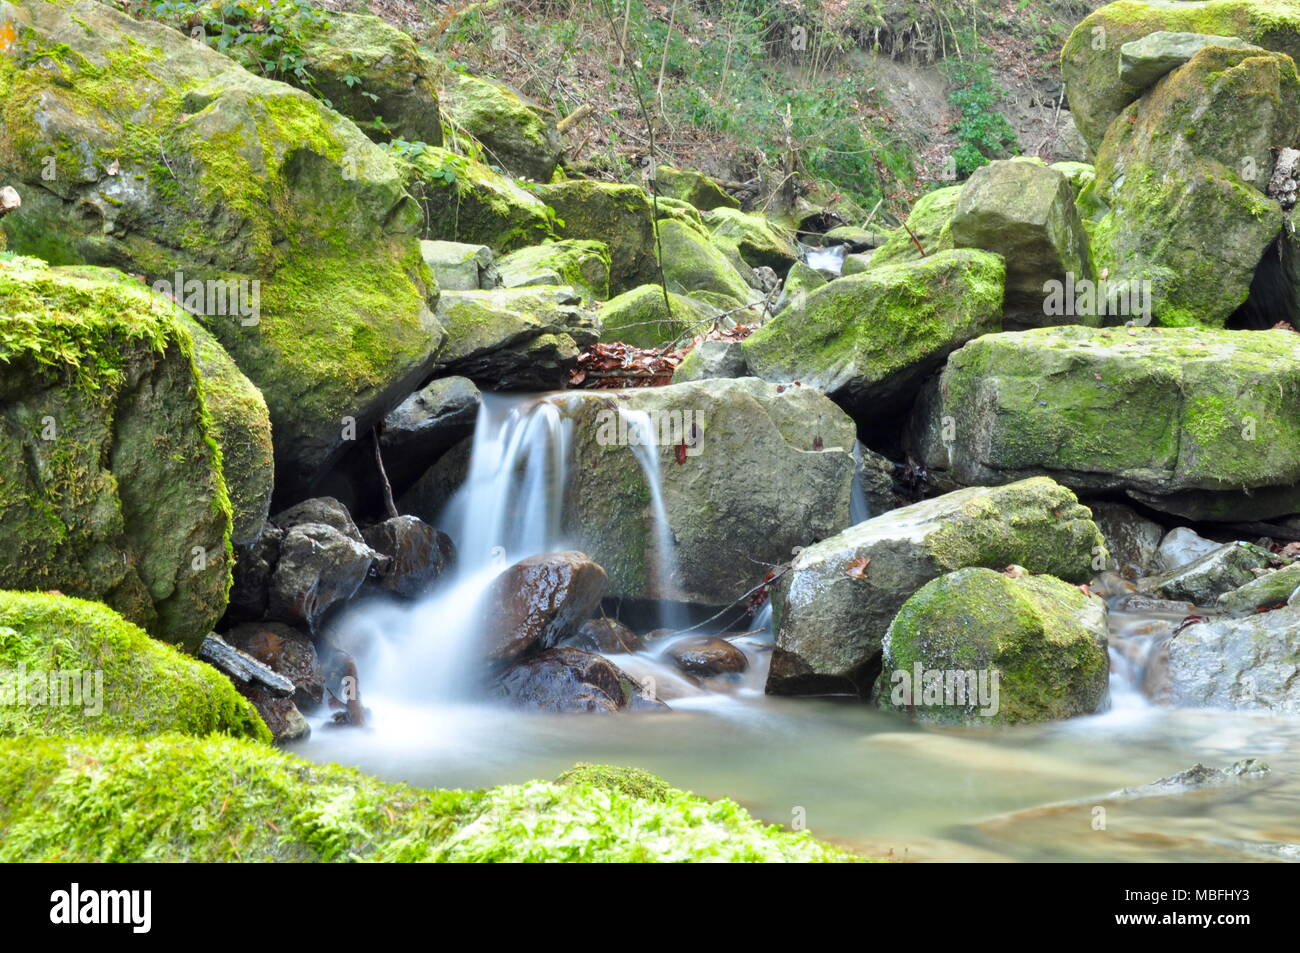 Green, mossy waterfall in the Goldach river, canyon in Wolfhalden, Switzerland Stock Photo